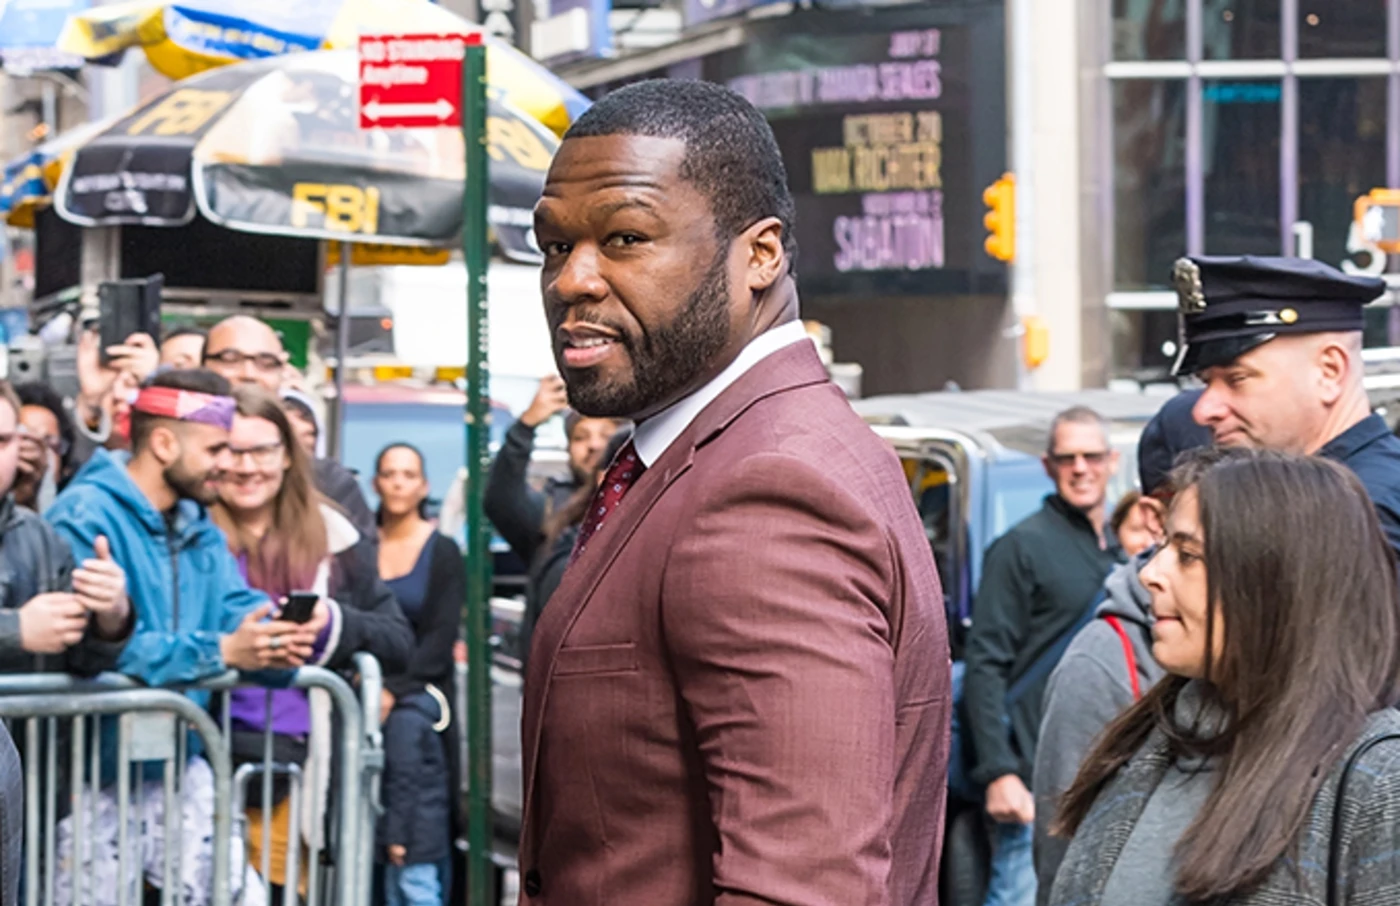 50 Cent throws his hat in the ring of celebs wanting to buy BET